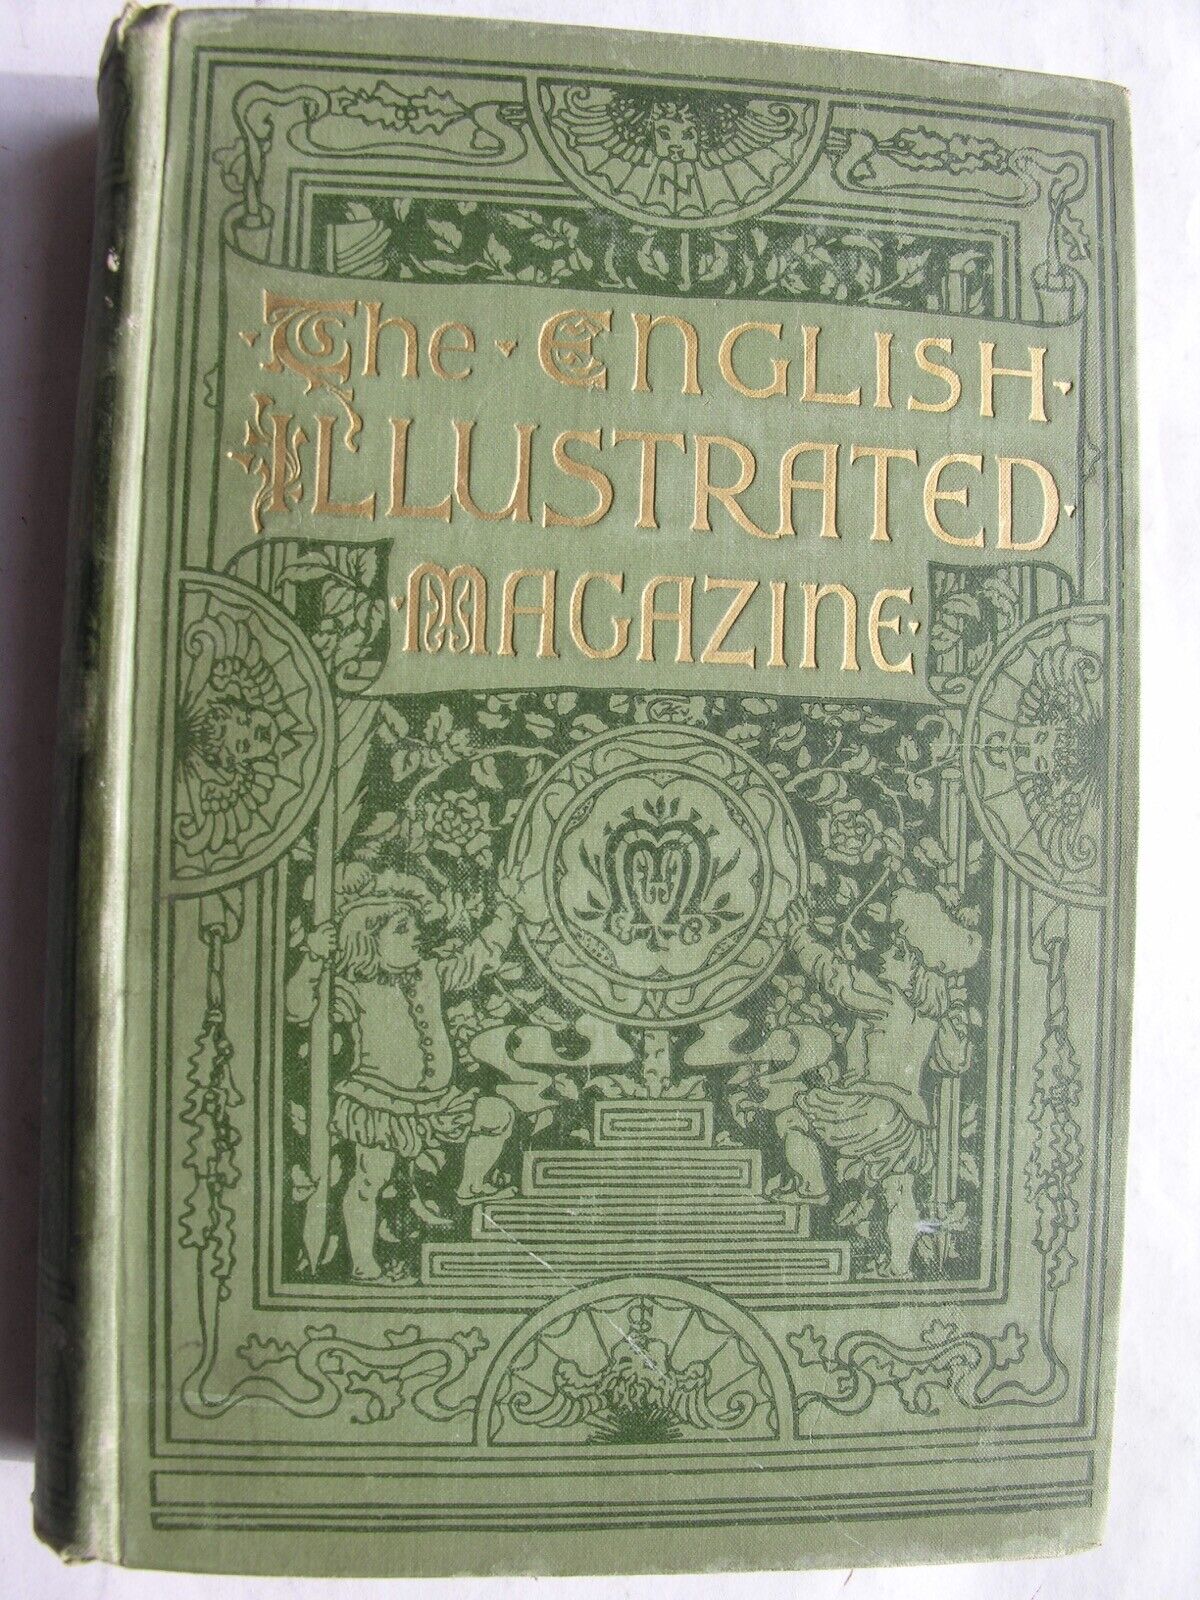 ENGLISH ILLUSTRATED MAGAZINE 1885-86 Wilkie Collins J.M Barrie Newcastle Chester